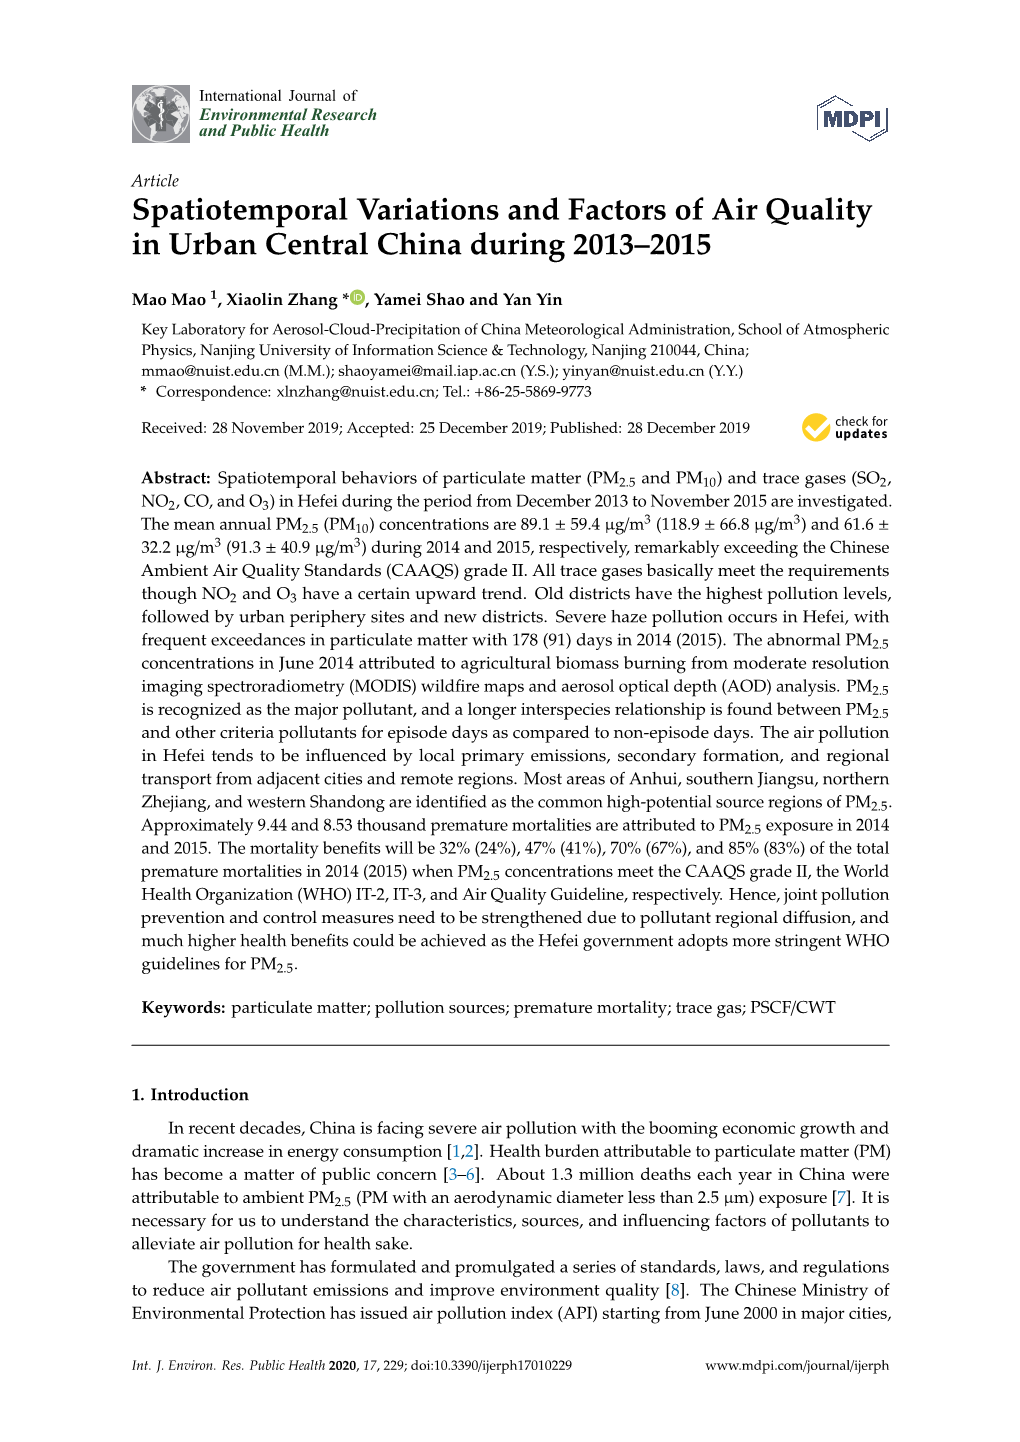 Spatiotemporal Variations and Factors of Air Quality in Urban Central China During 2013–2015